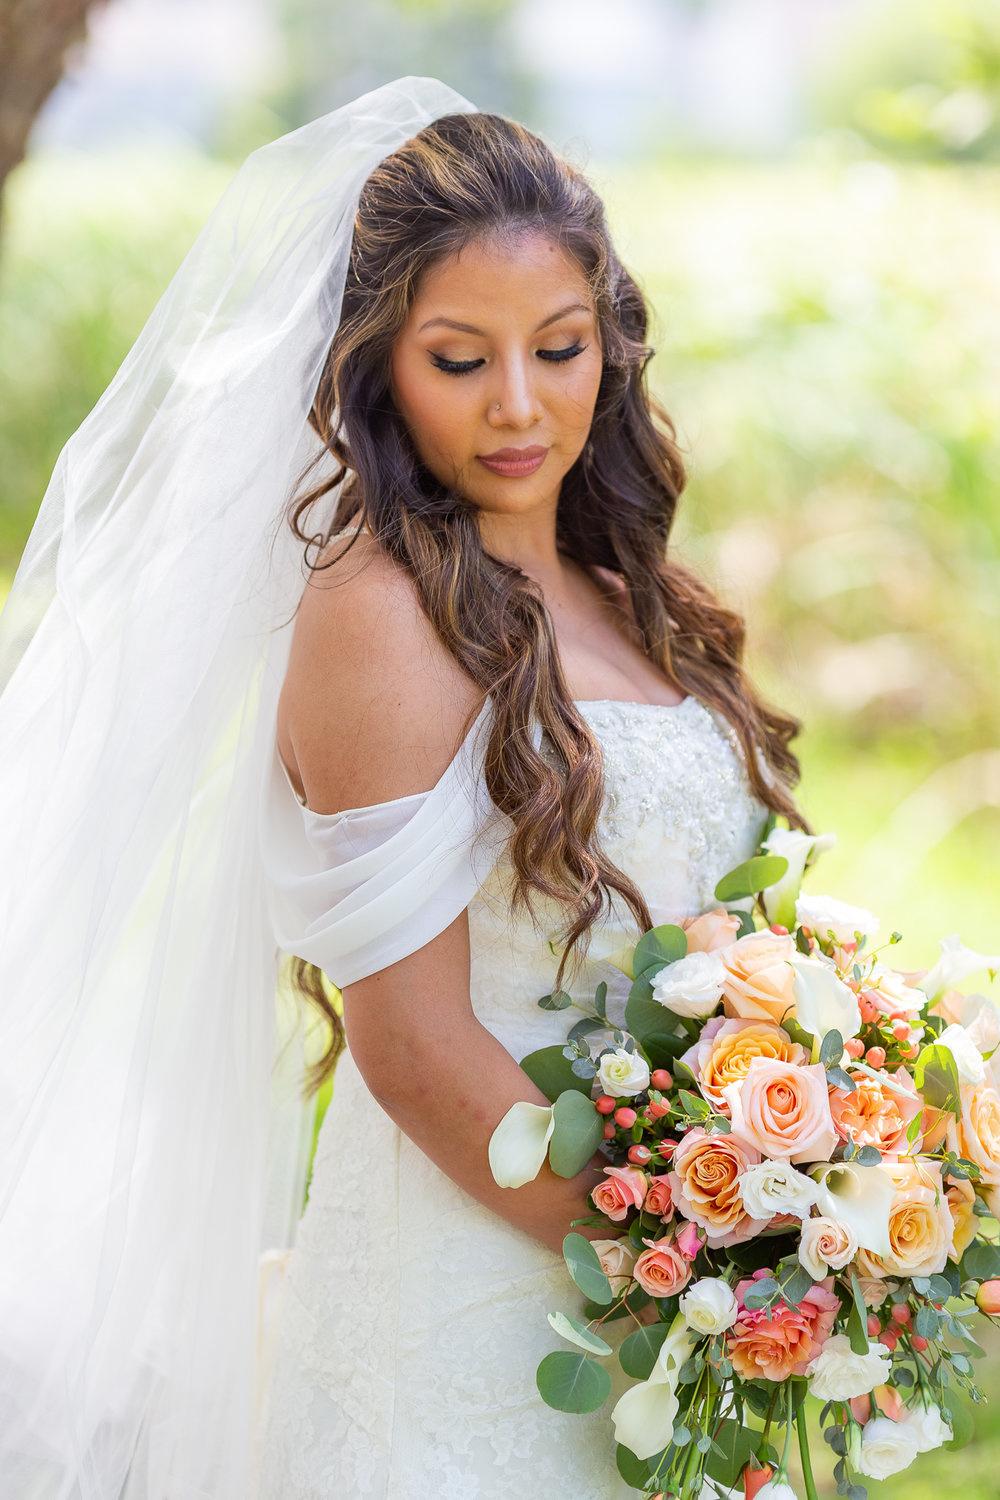 40 Wedding Hairstyles For Long Hair: Bridal Updos, Veils & More